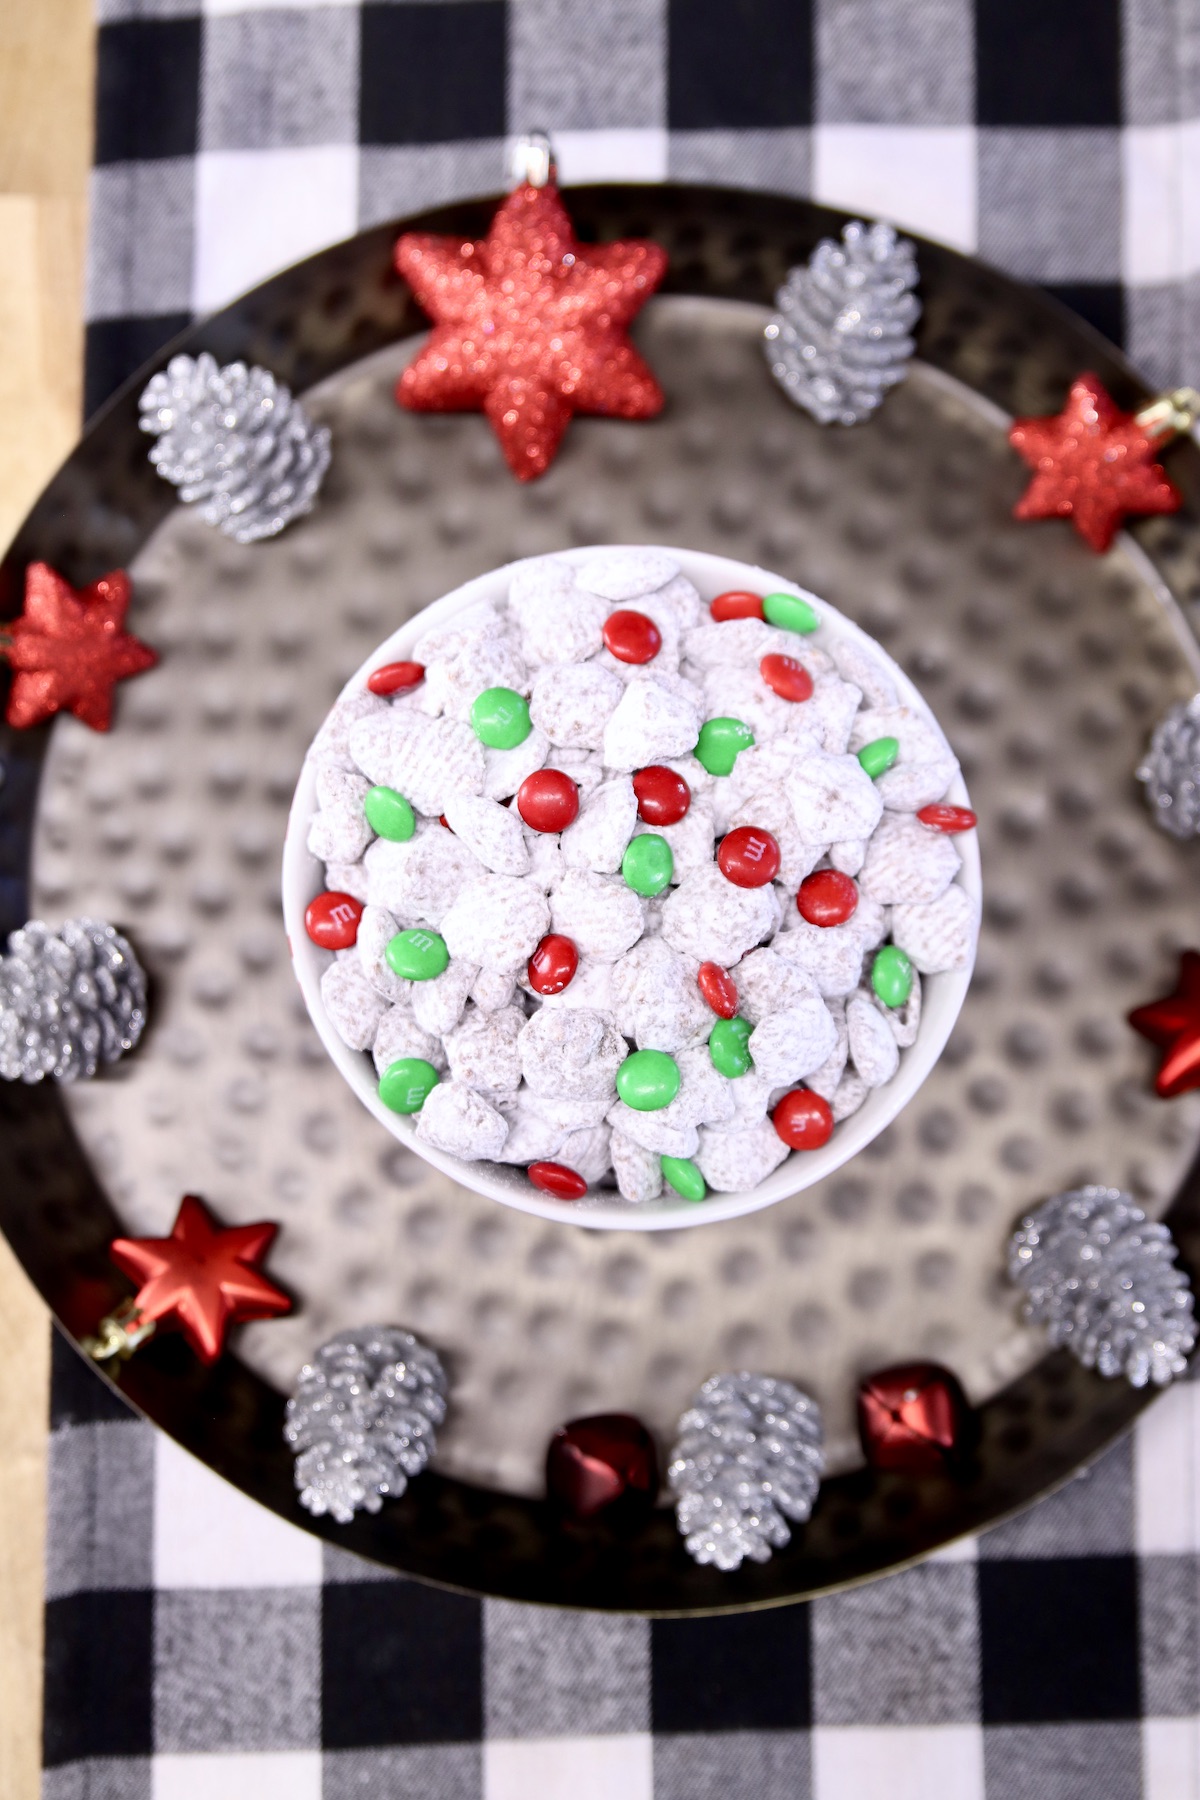 Tray with Christmas ornaments and Reindeer Chow